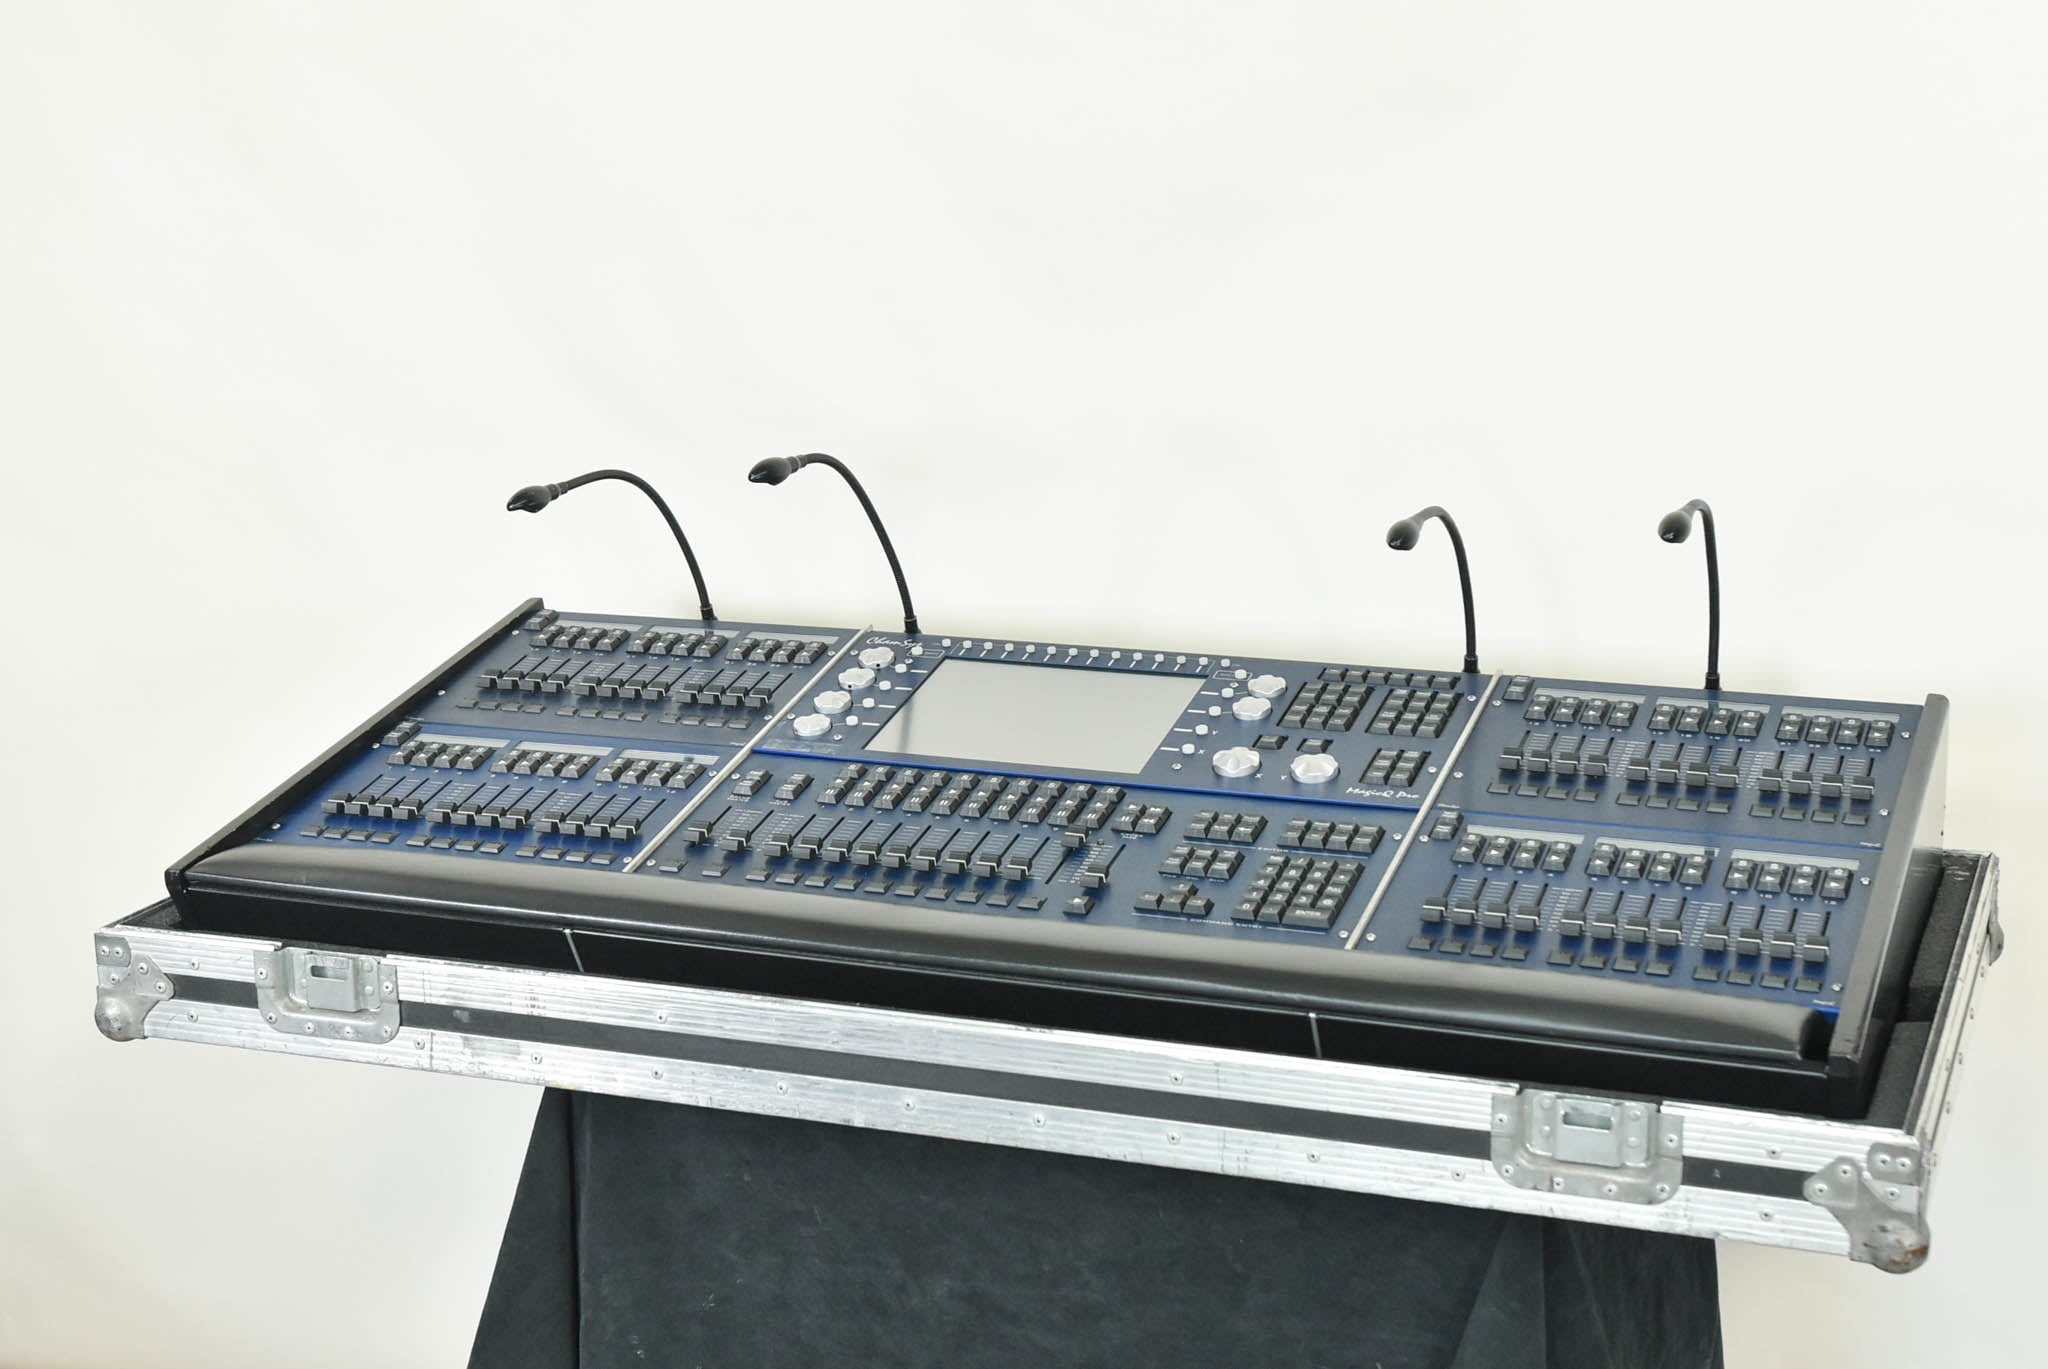 ChamSys MagicQ MQ300 Pro Lighting Control Console with Case